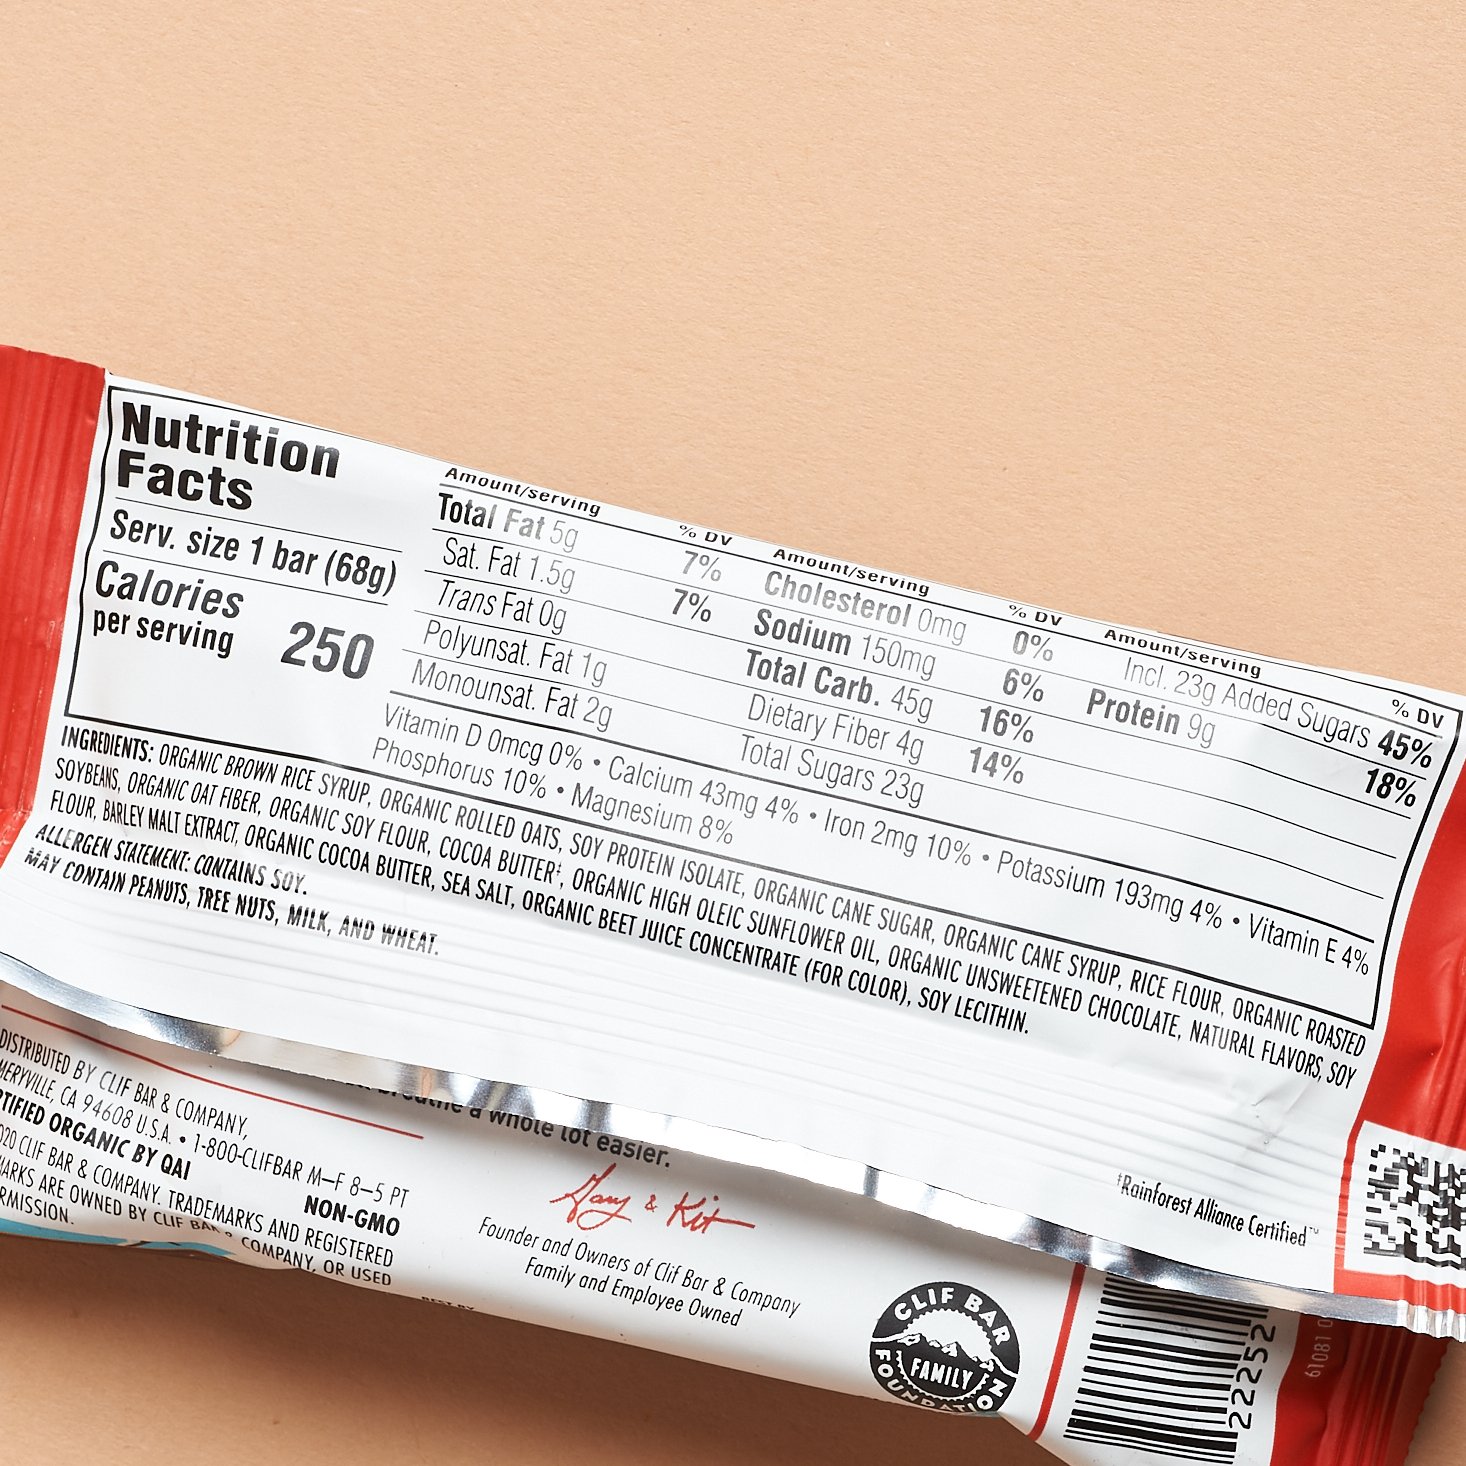 Clif bar nutrition facts